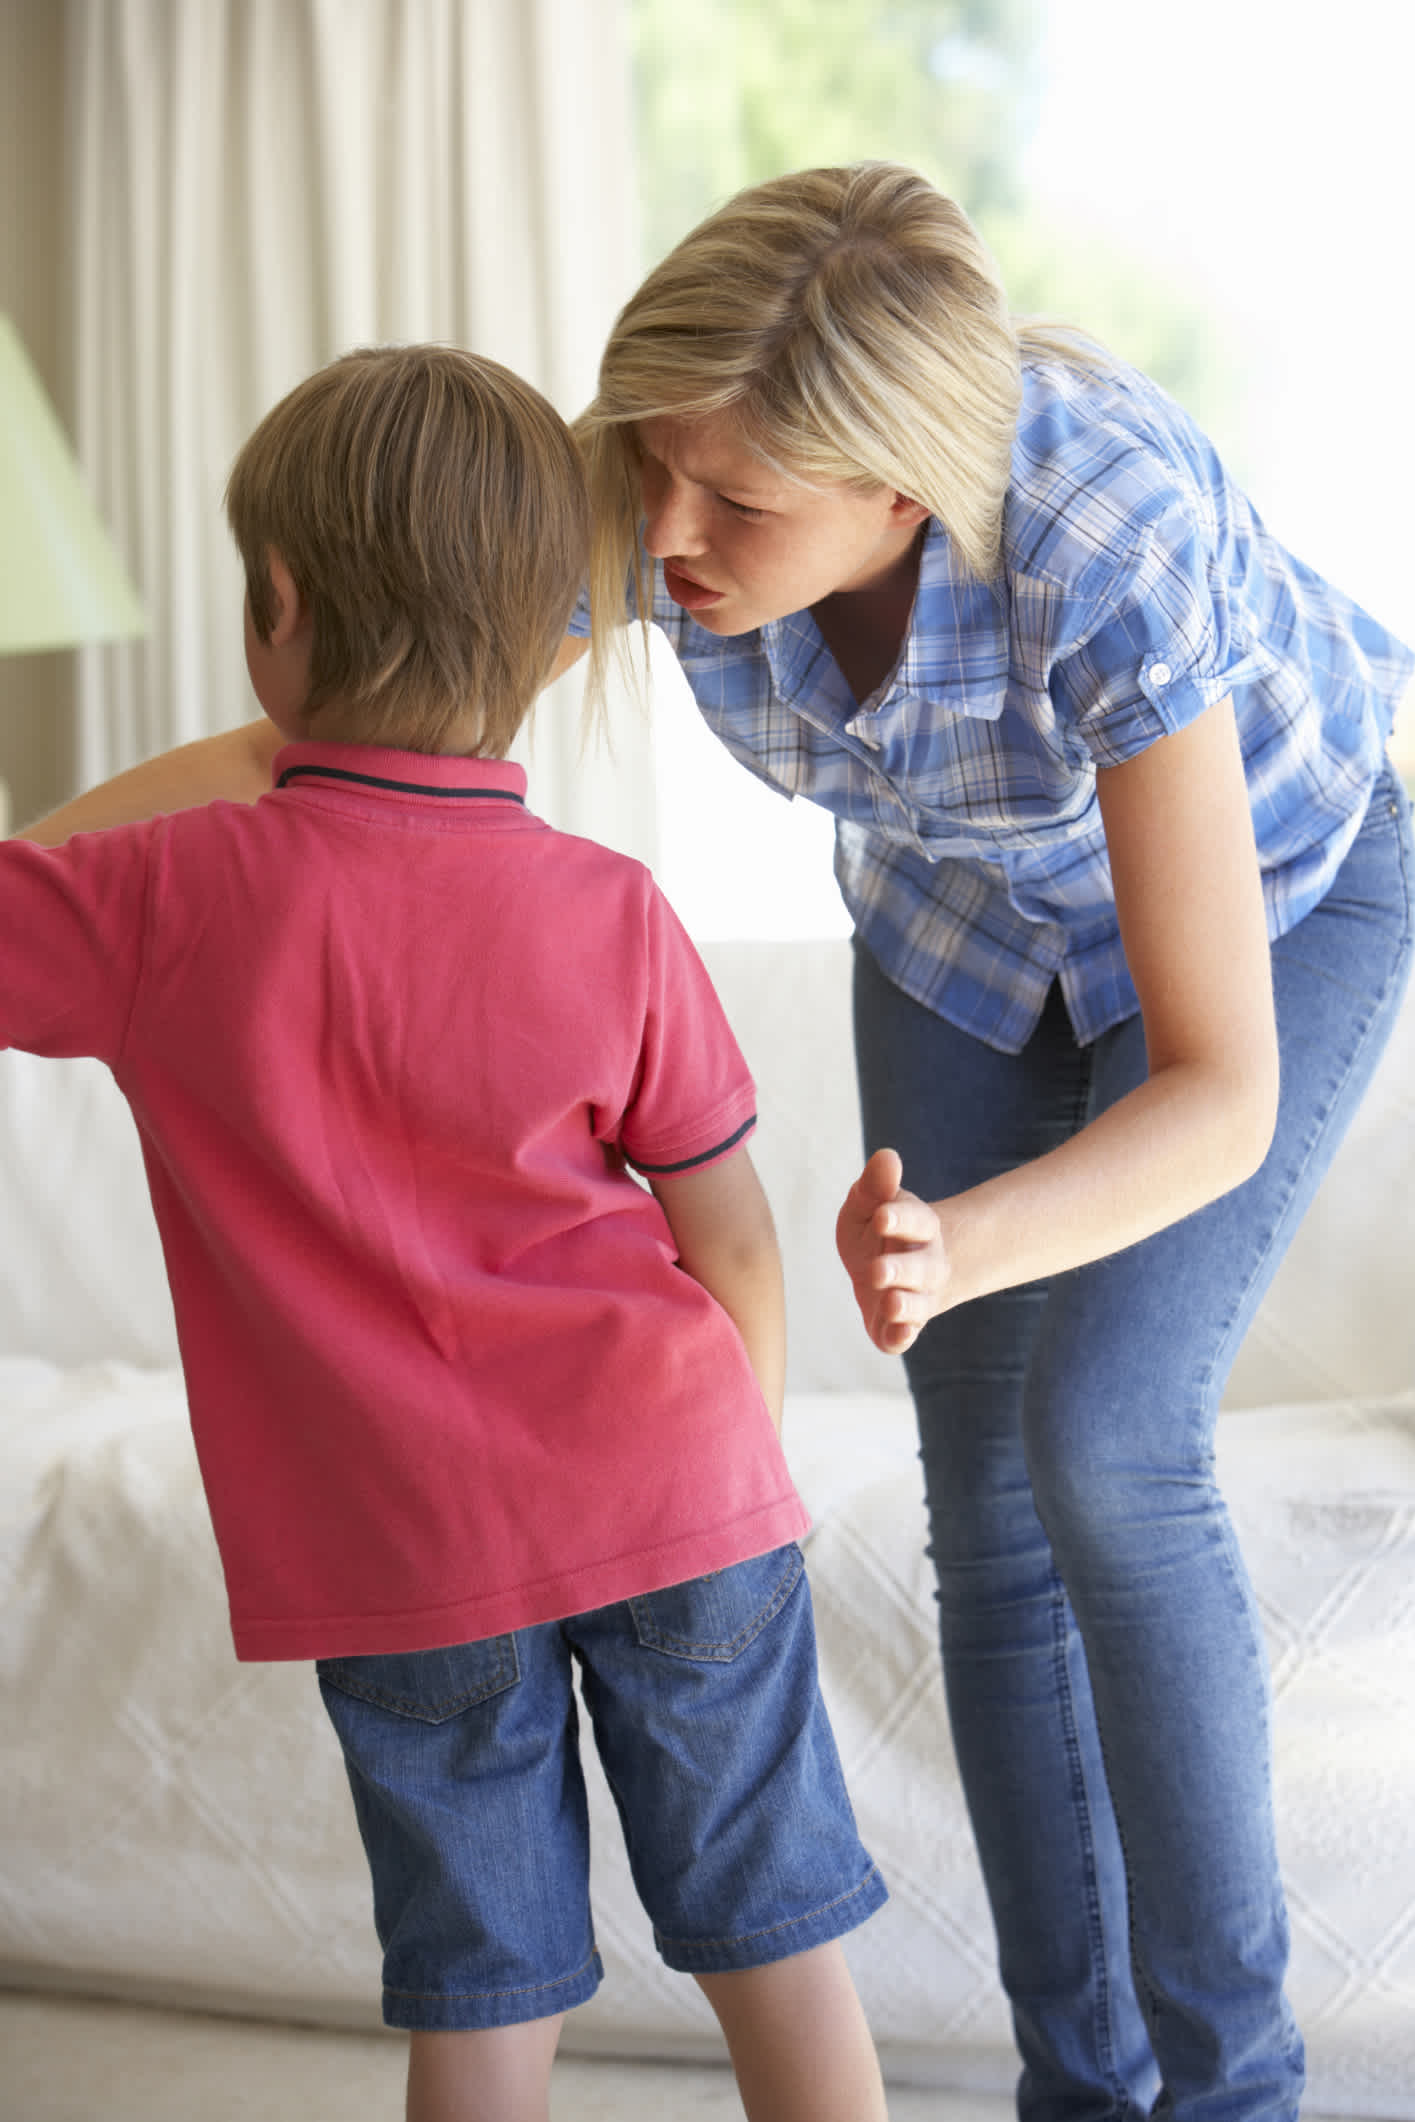 Spanking Can Cause Behavioral Problems Later